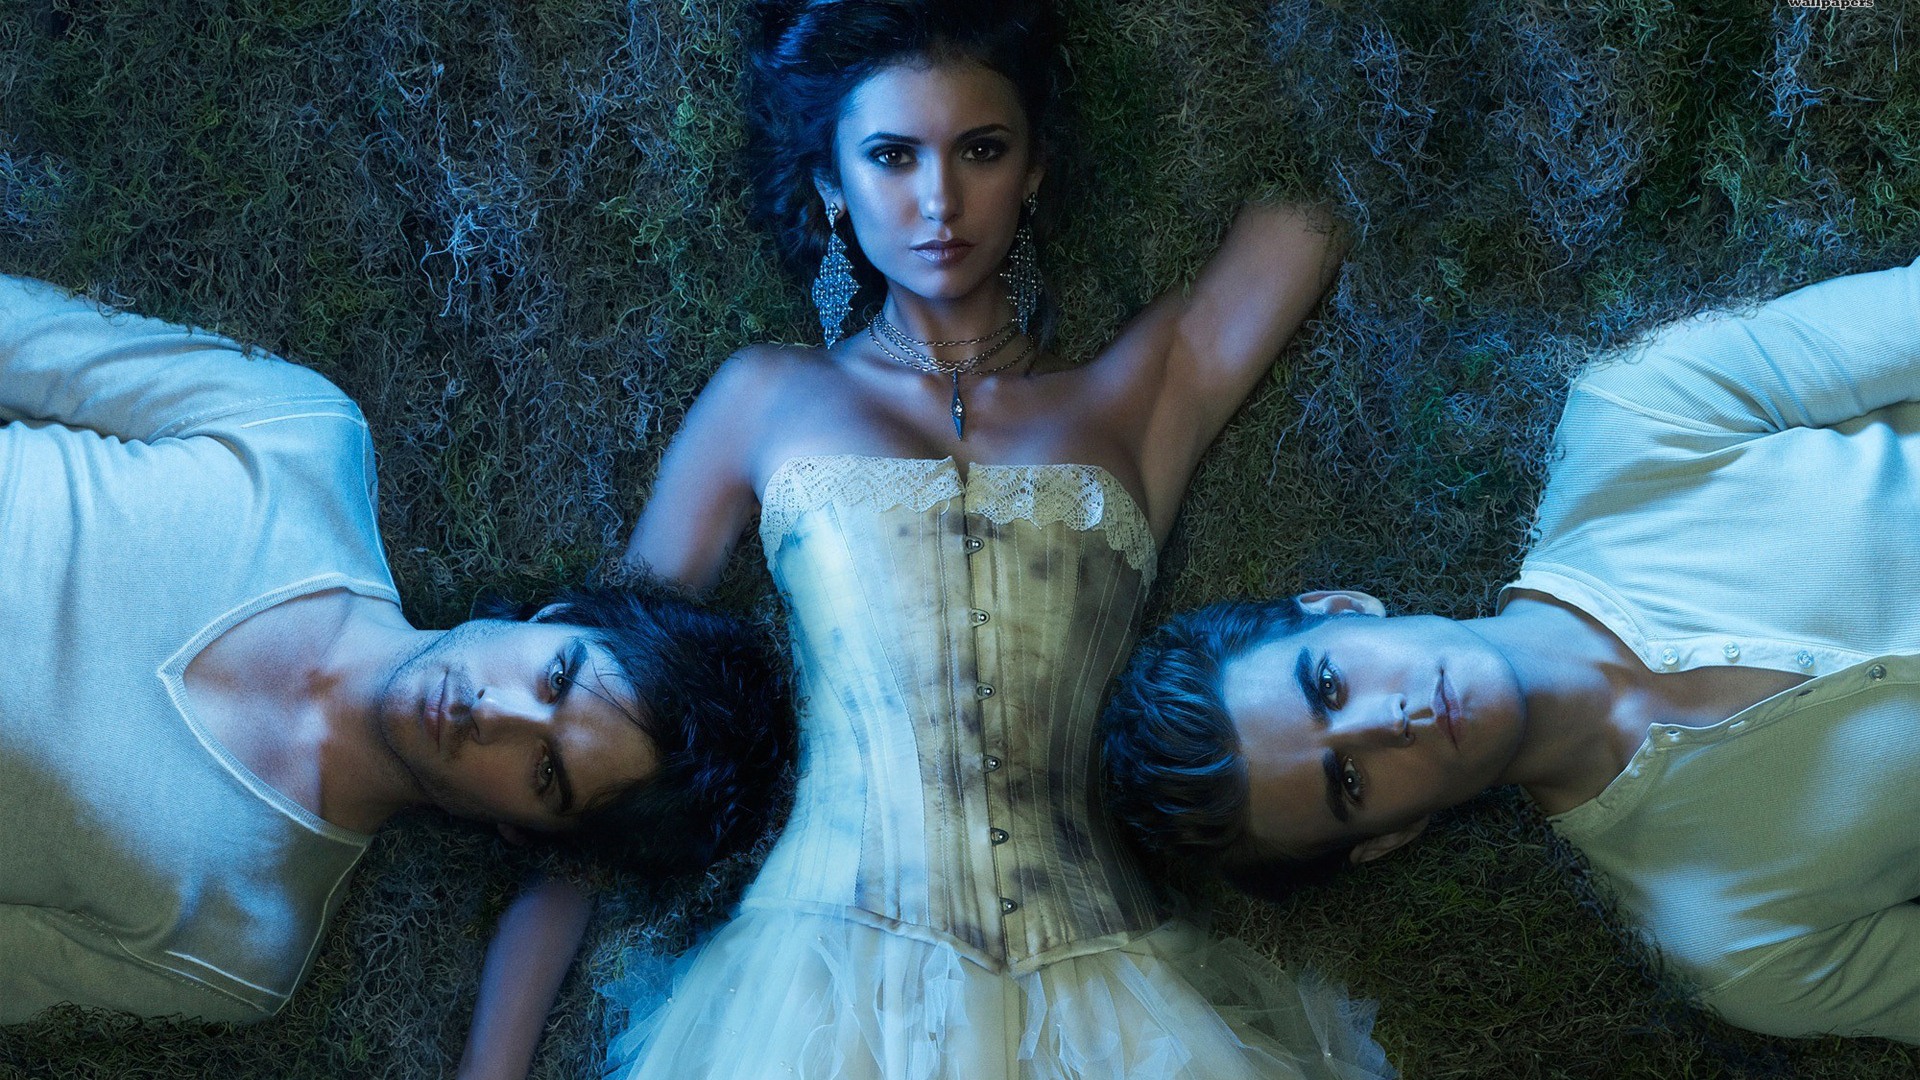 The Vampire Diaries HD Wallpapers #9 - 1920x1080